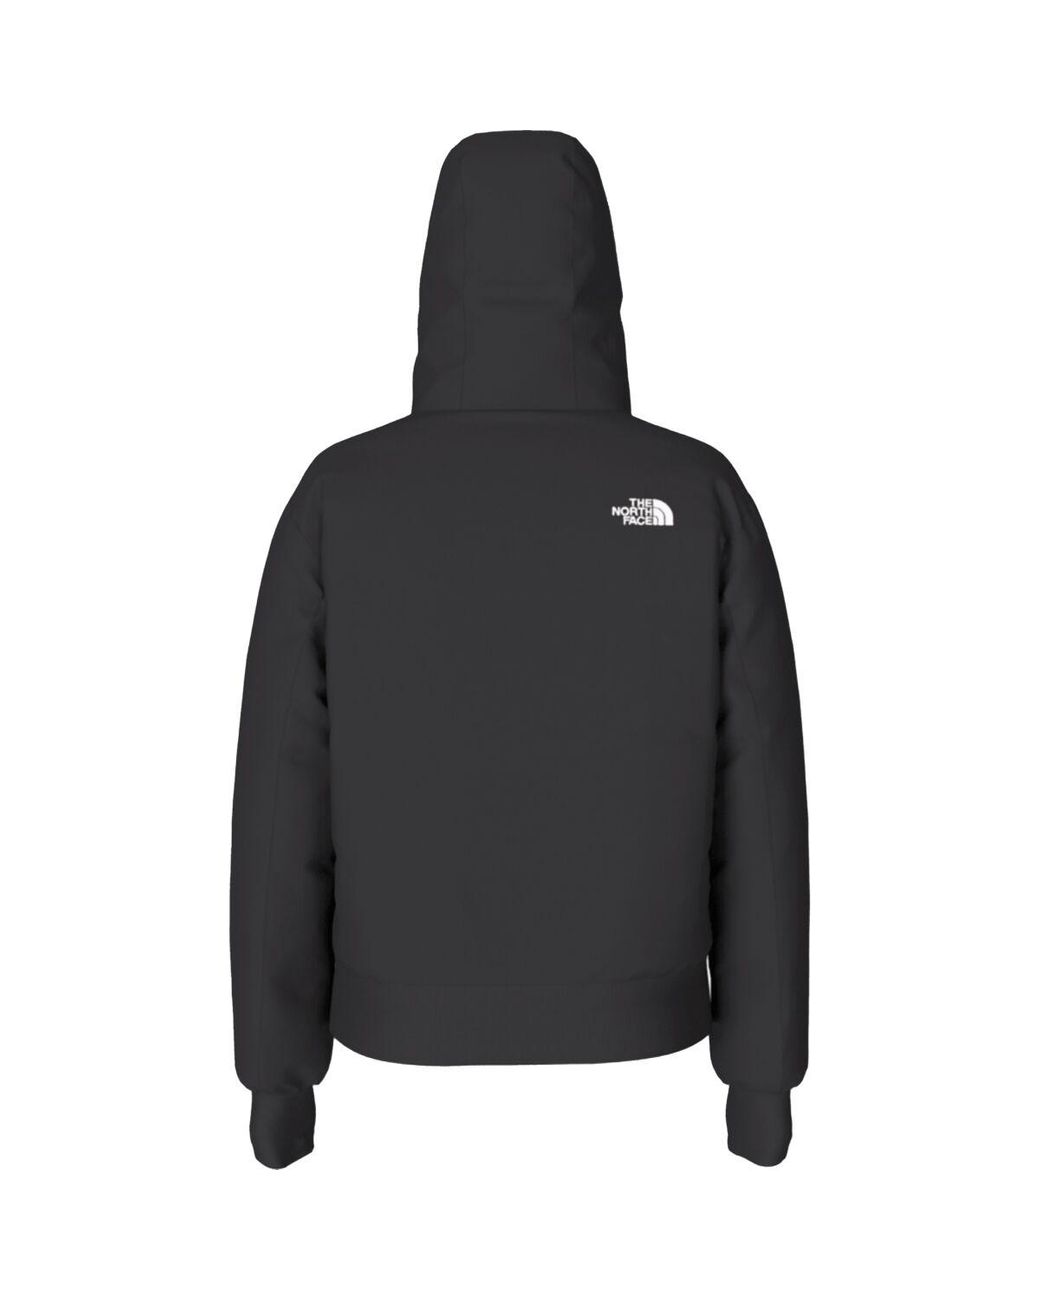 The North Face Arctic Bomber Jacket in Black | Lyst